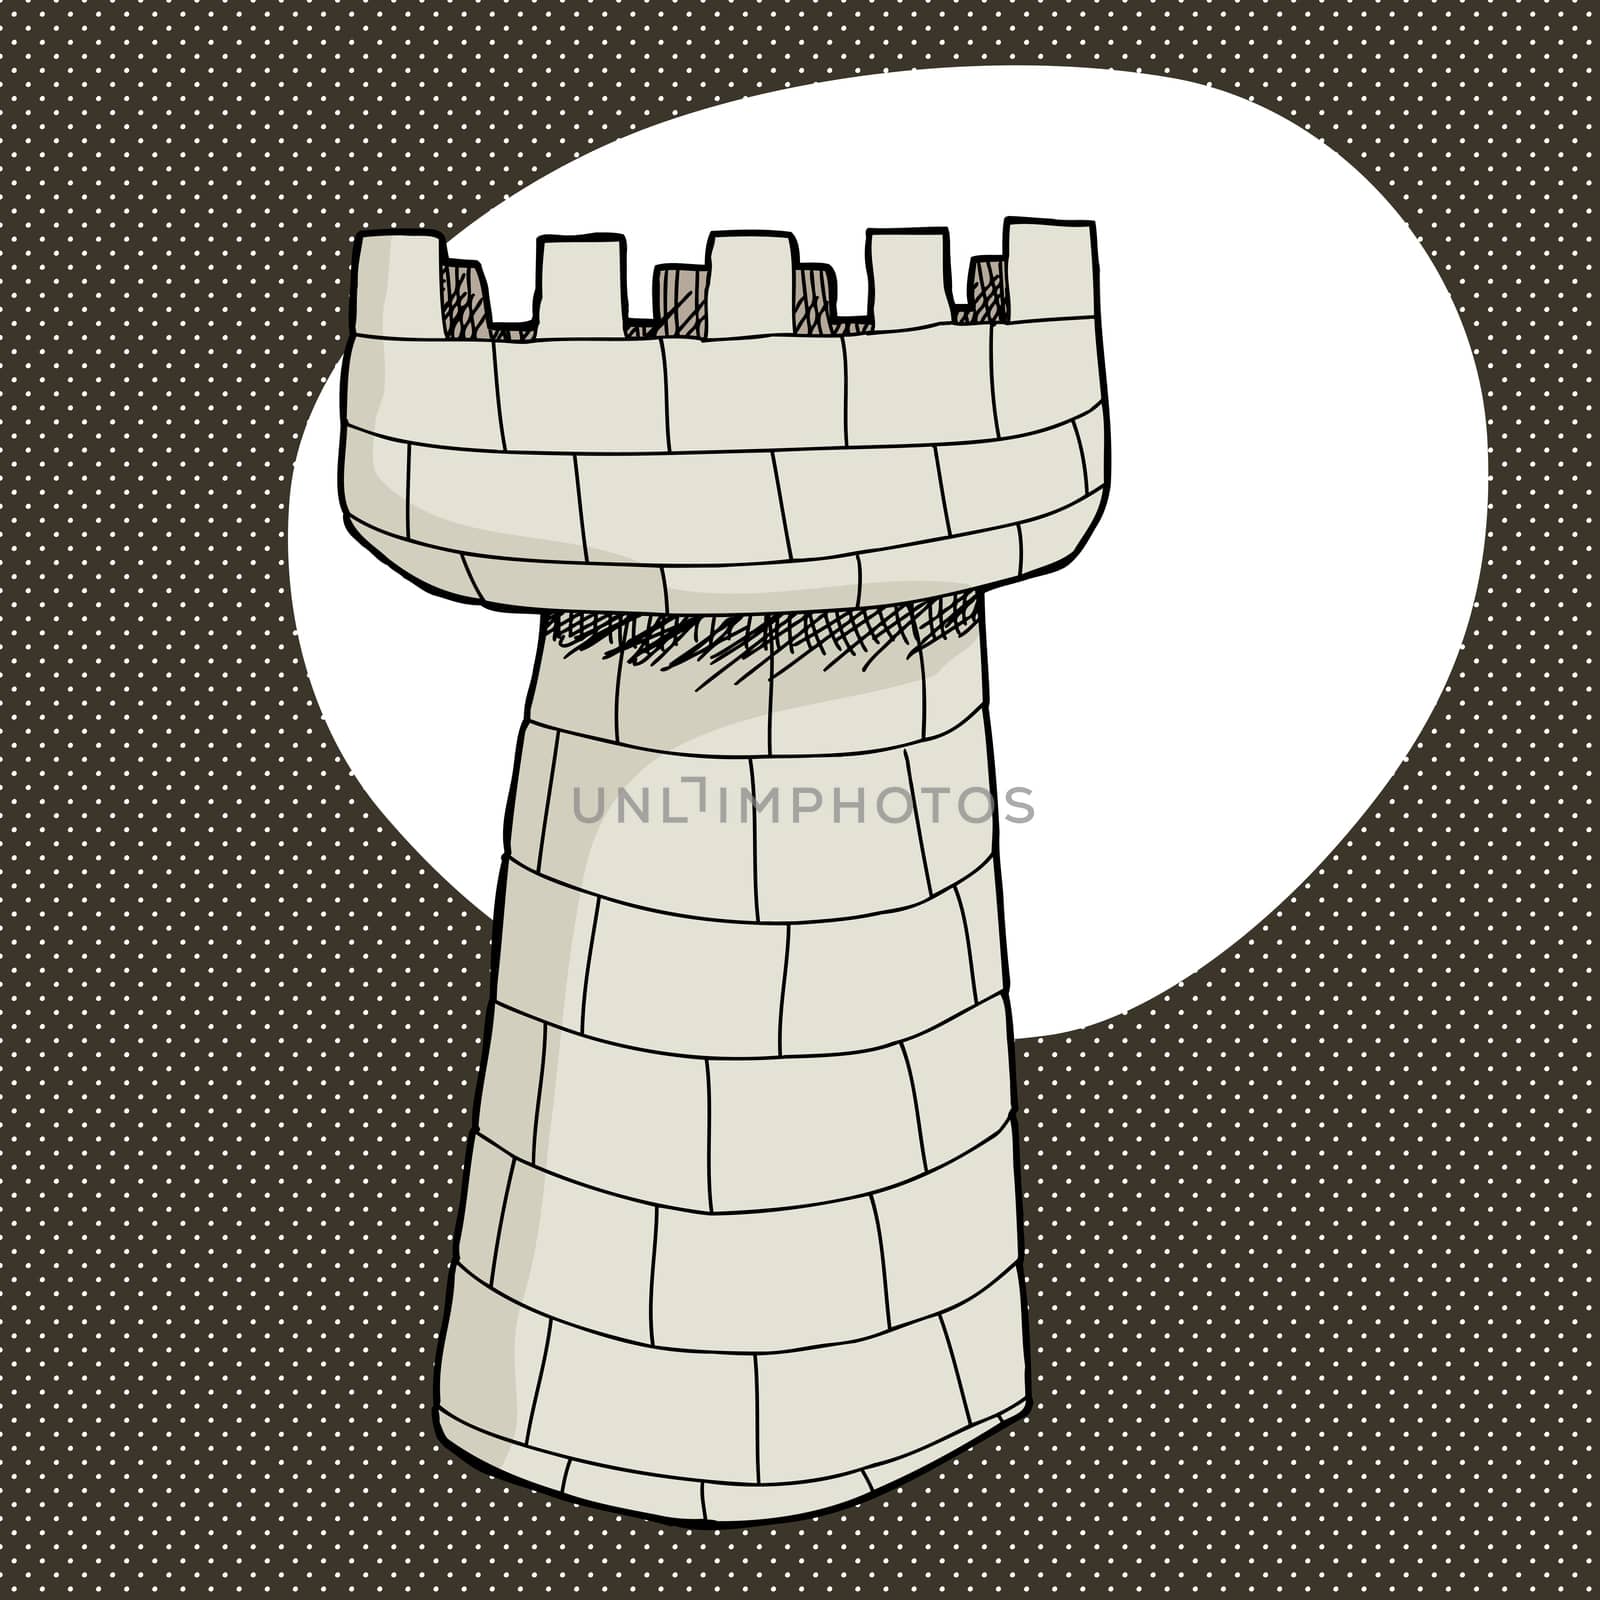 Single Castle Tower by TheBlackRhino